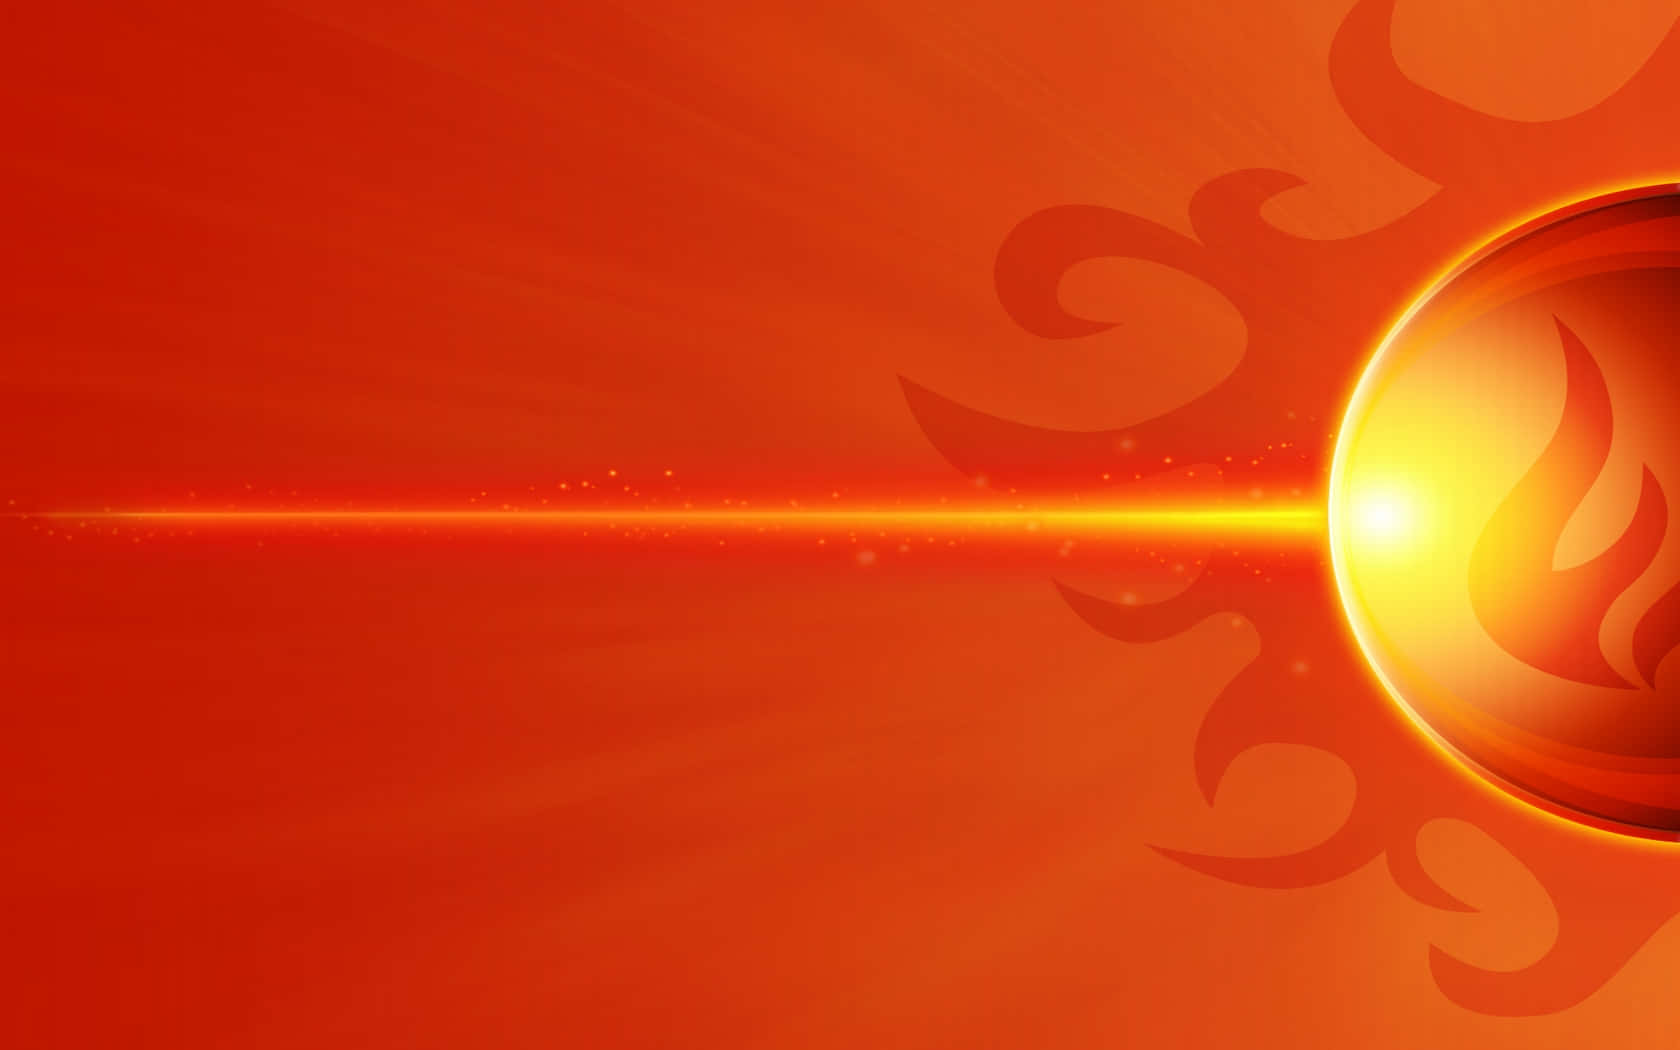 A Sun With A Flame On An Orange Background